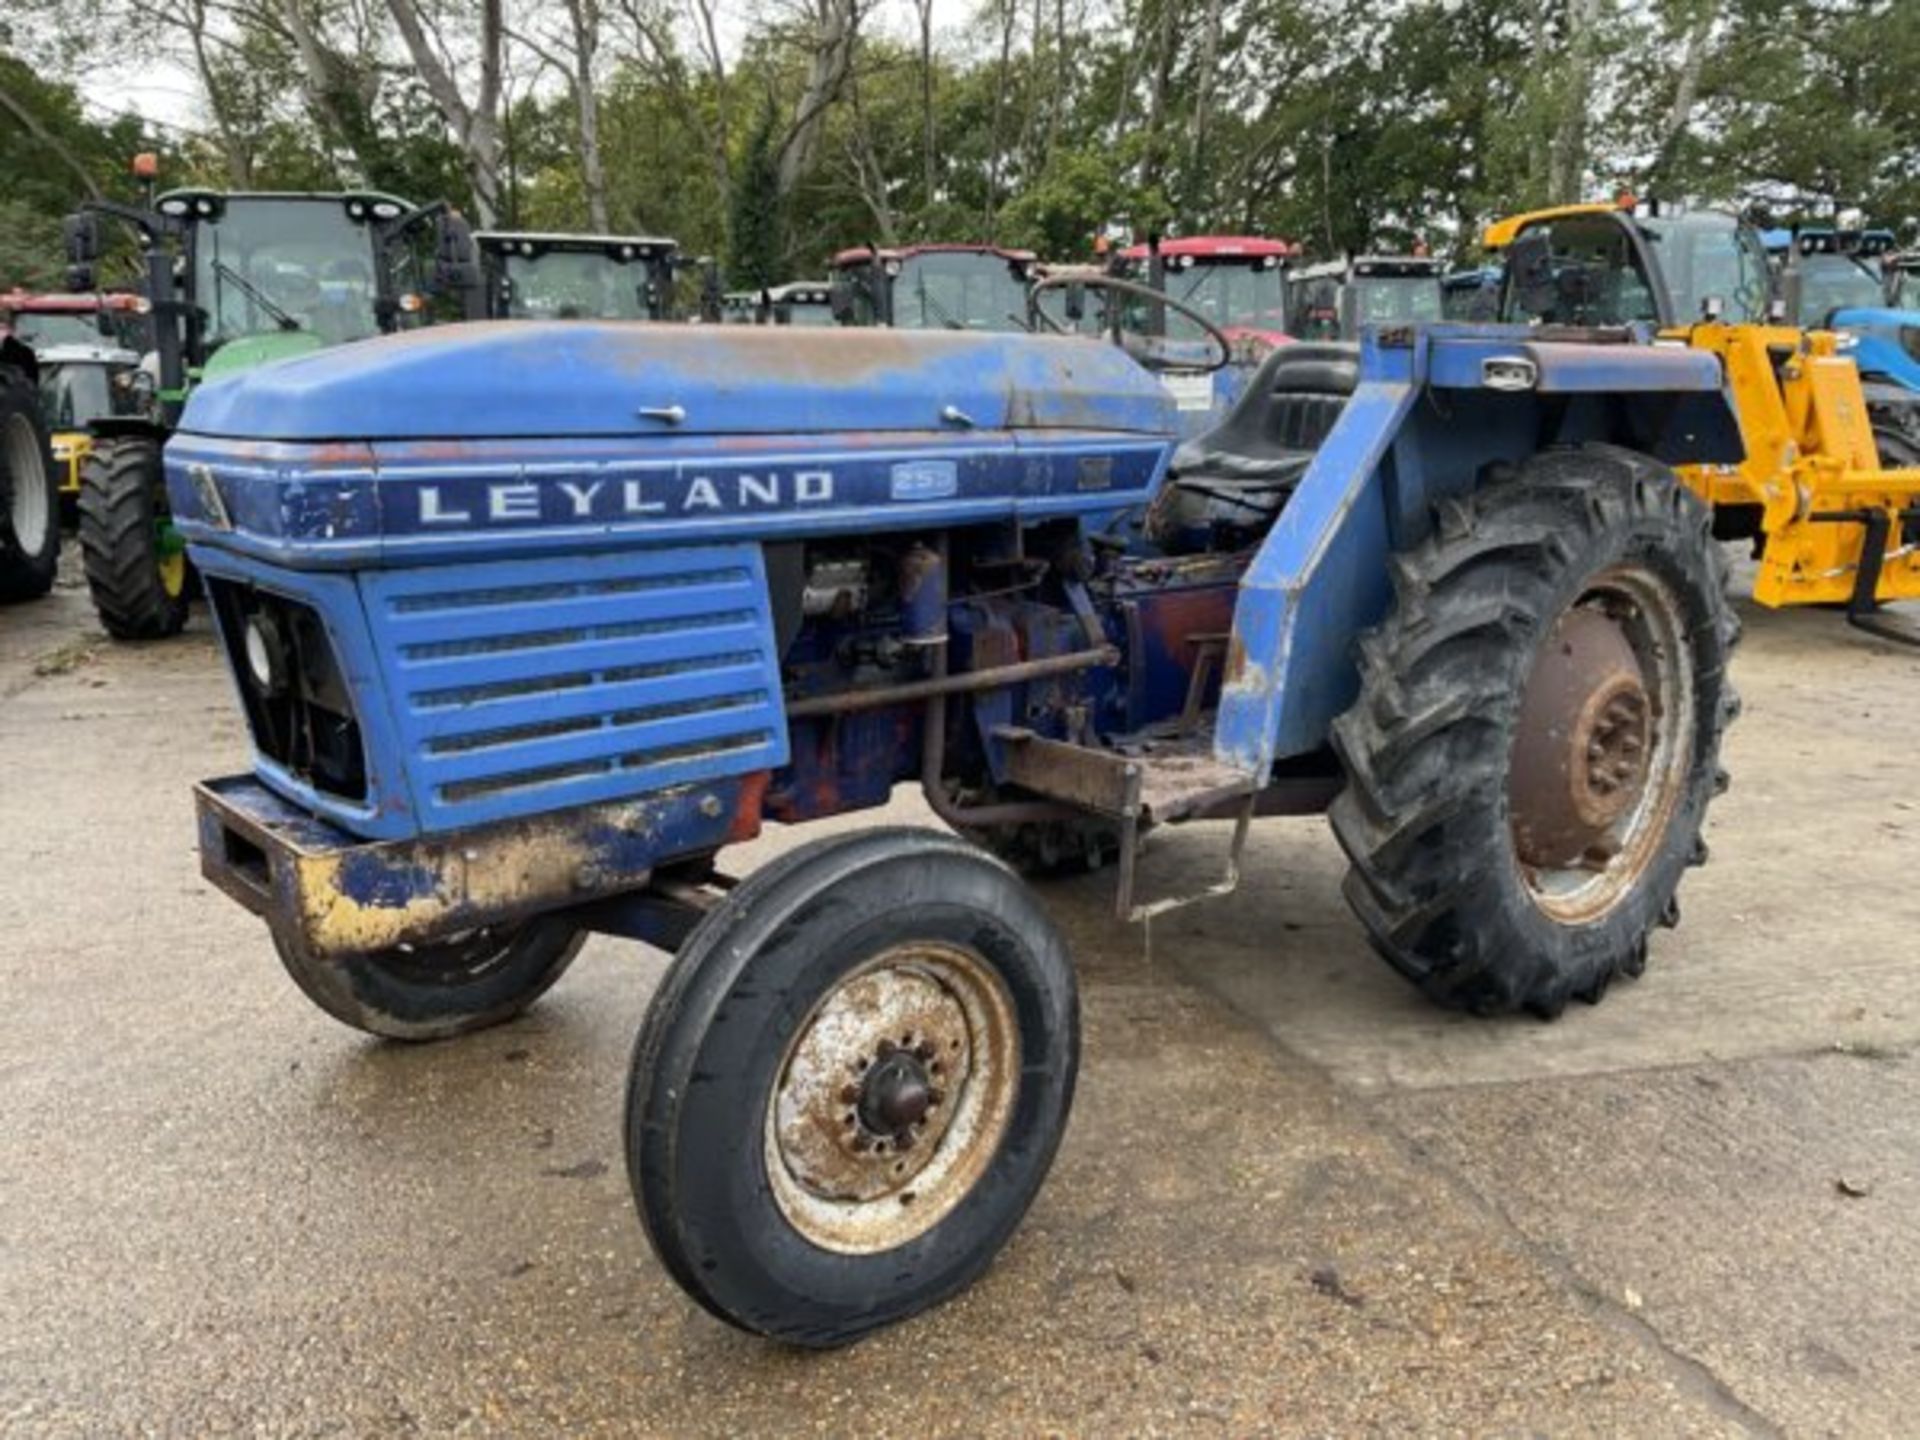 YEAR 1992 – K REG LEYLAND 253 TRACTOR. COMES WITH PART CAB. 3 CYLINDER PERKINS ENGINE - Image 6 of 14